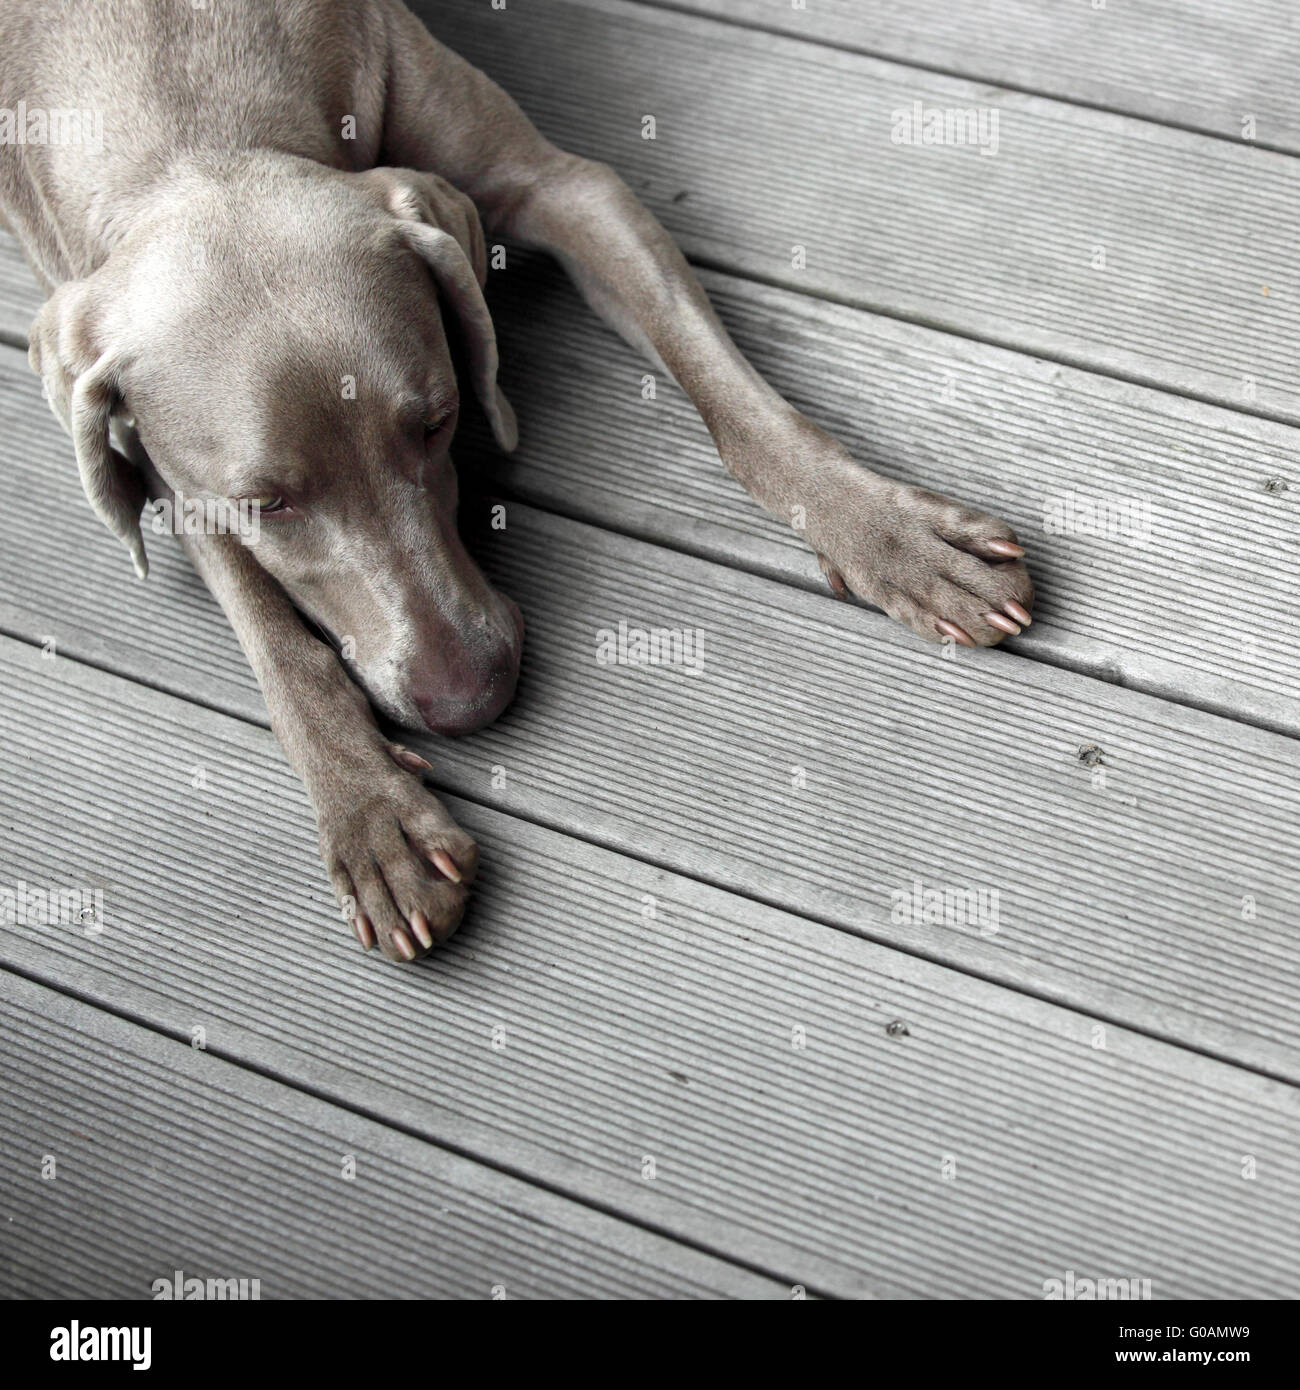 Dog rests on wooden floor Stock Photo